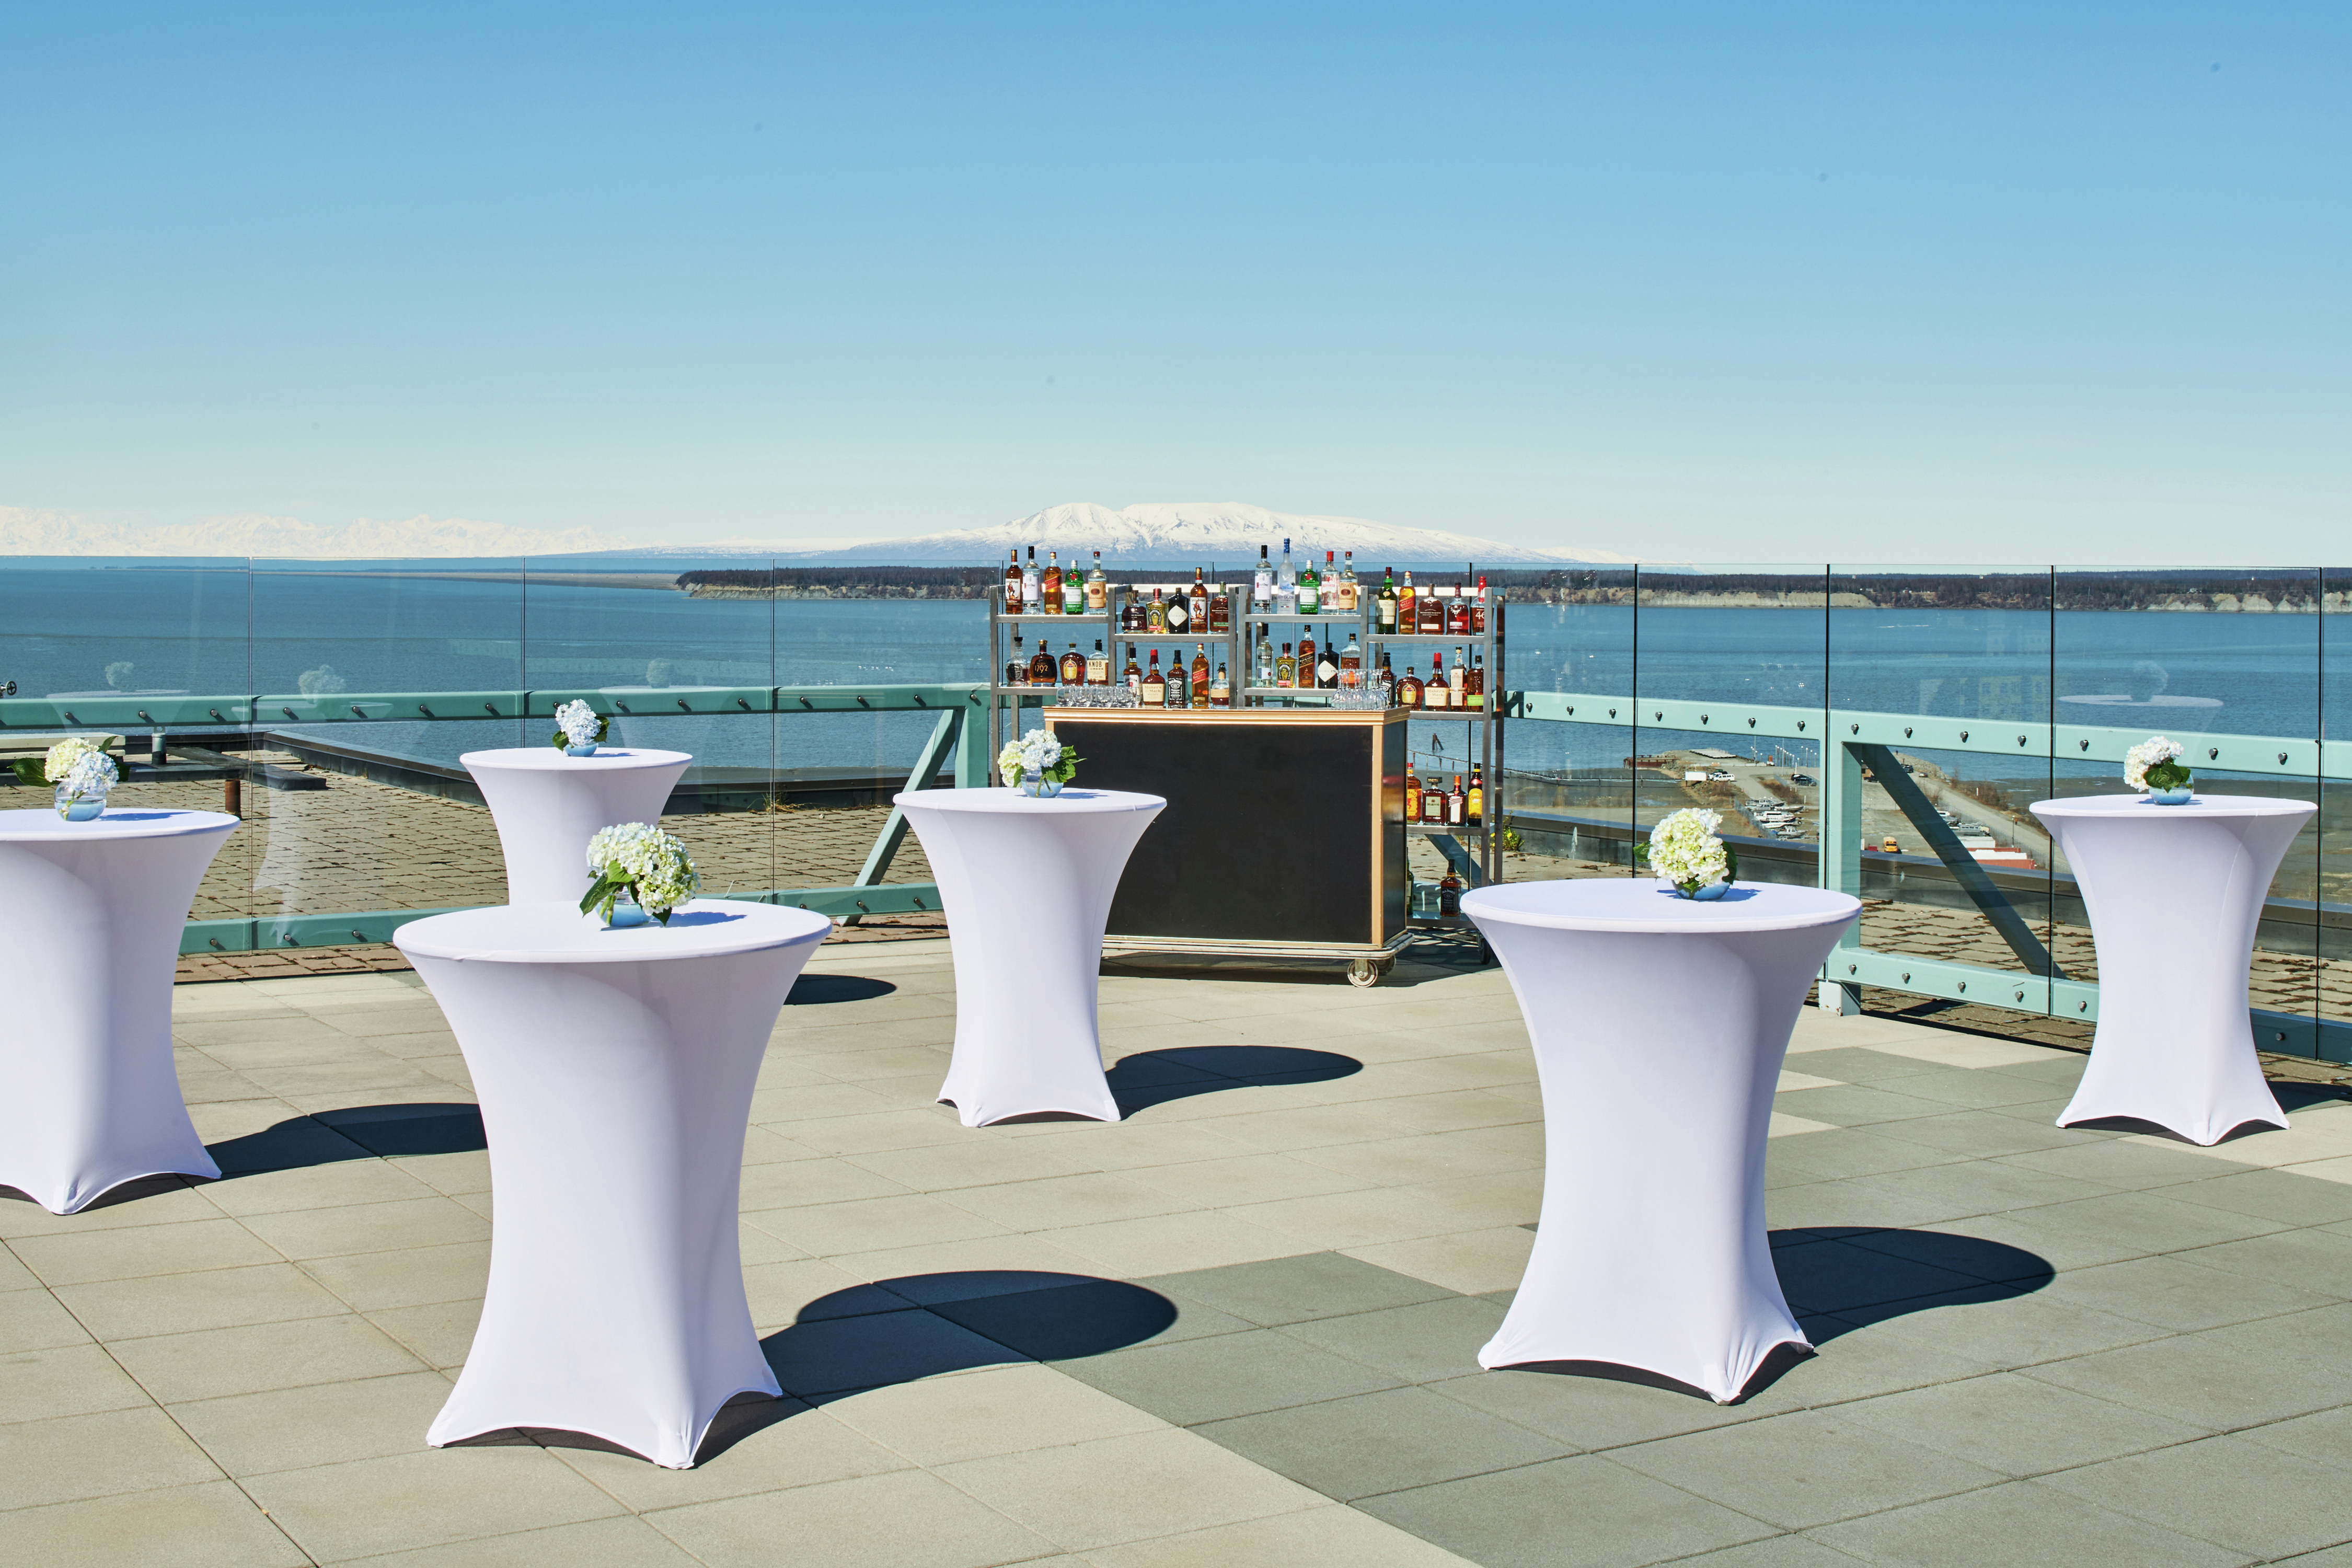 Outdoor Meeting Space with Beautiful Water Views